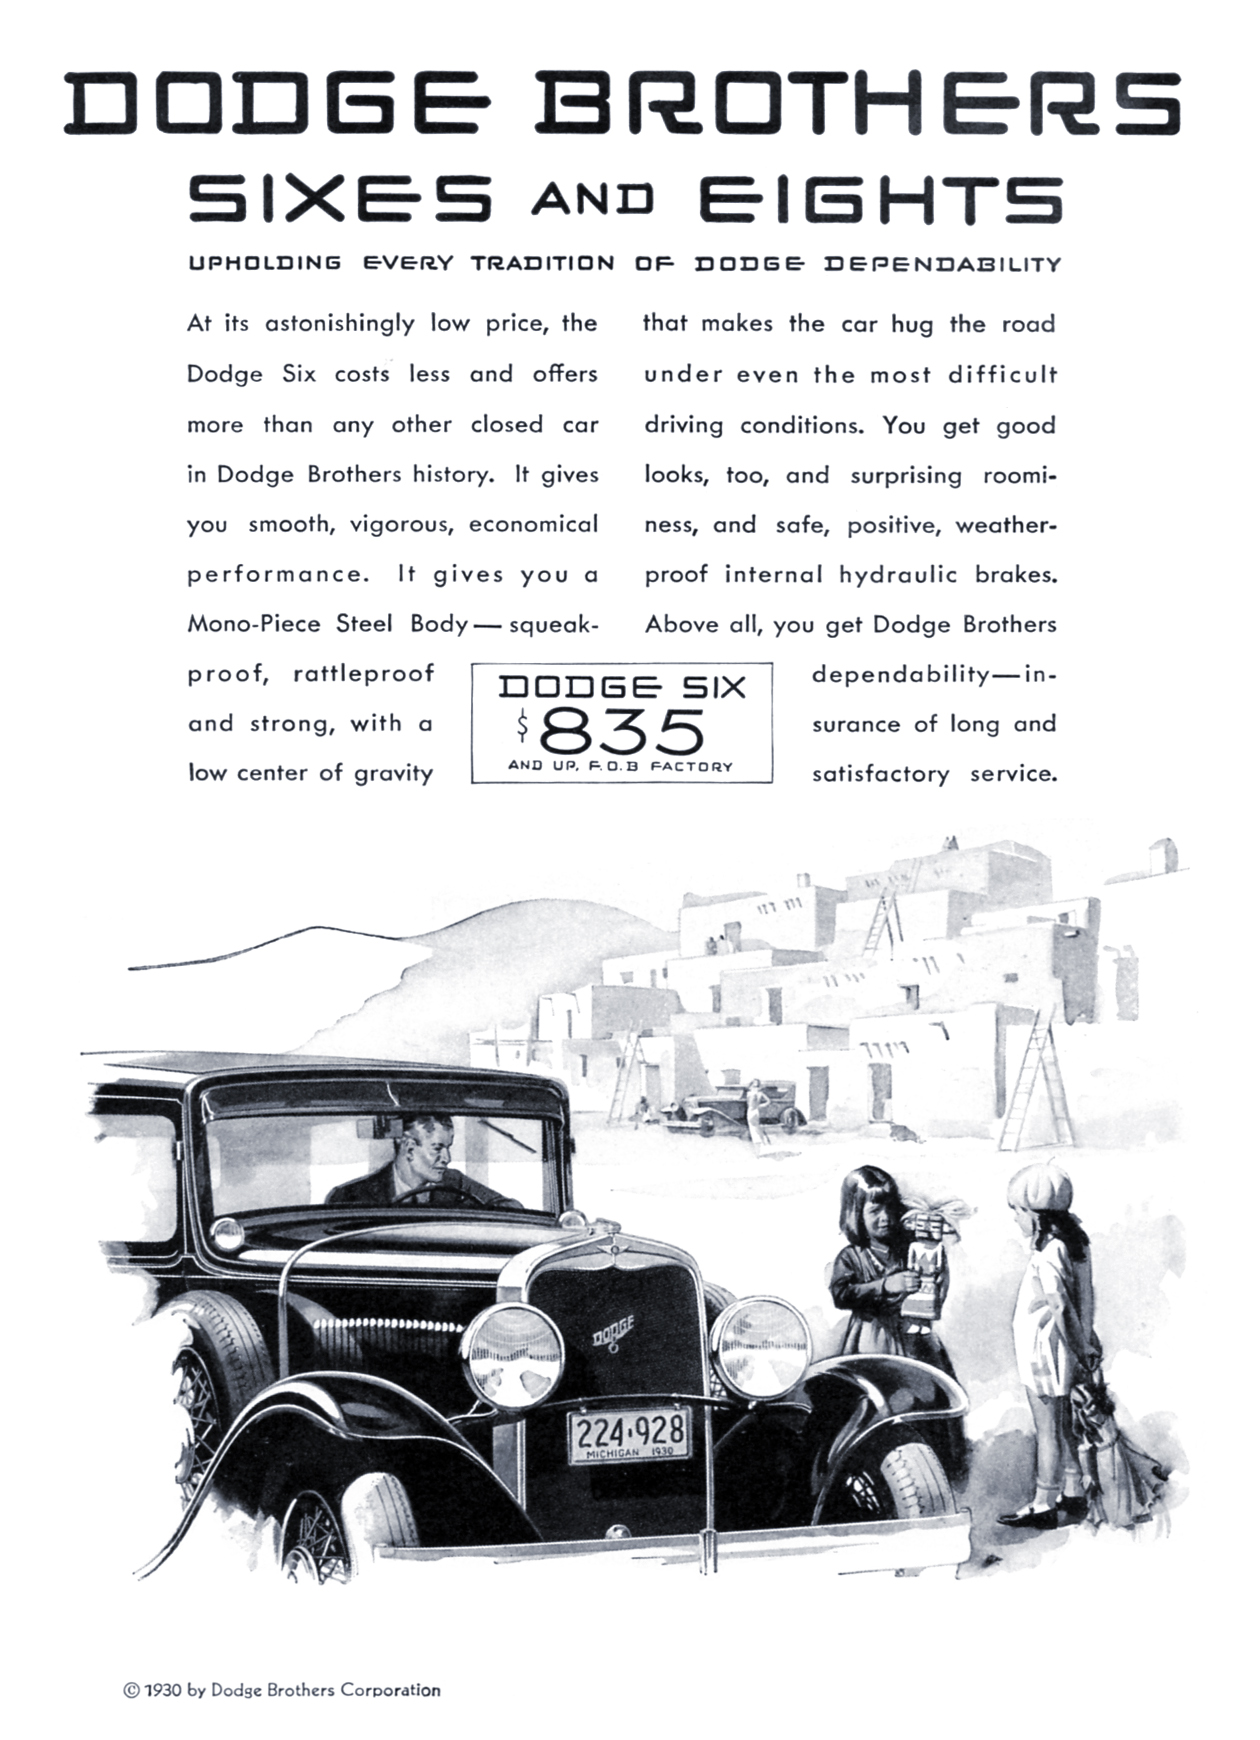 Dodge Brothers Six Ad (July-August, 1930)